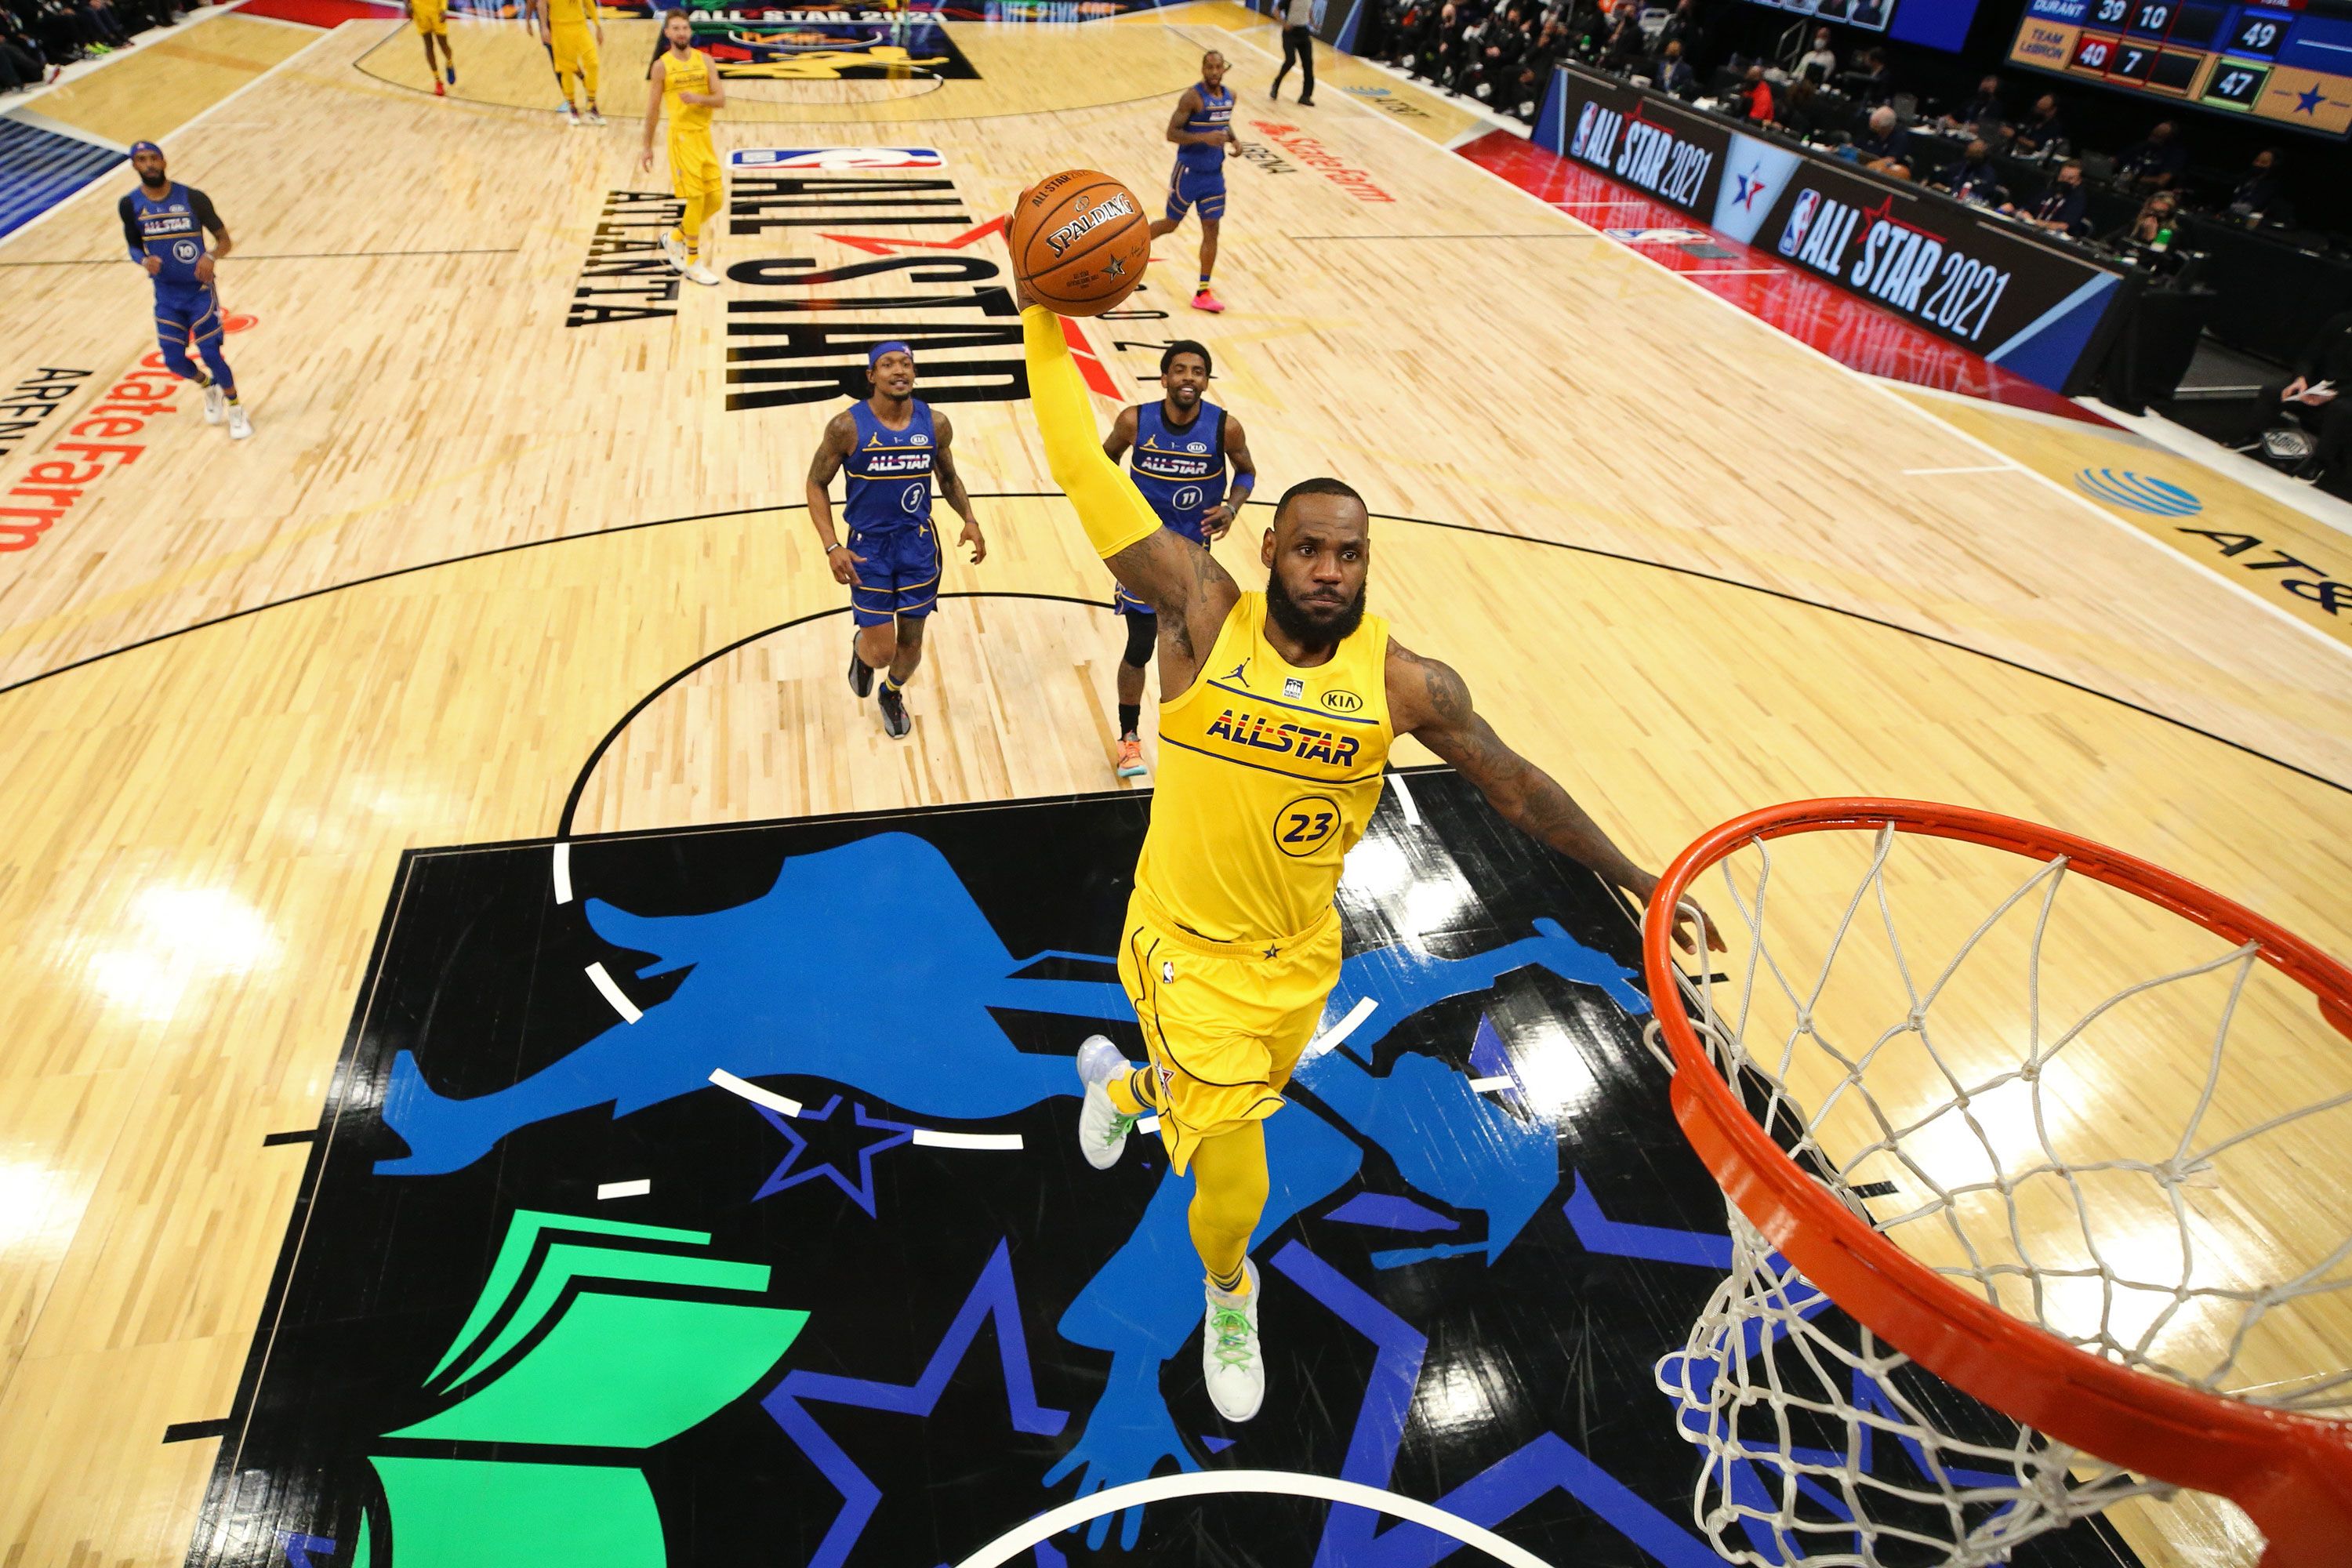 NBA All-Star Game 2021: Team LeBron wins, but HBCUs were the real